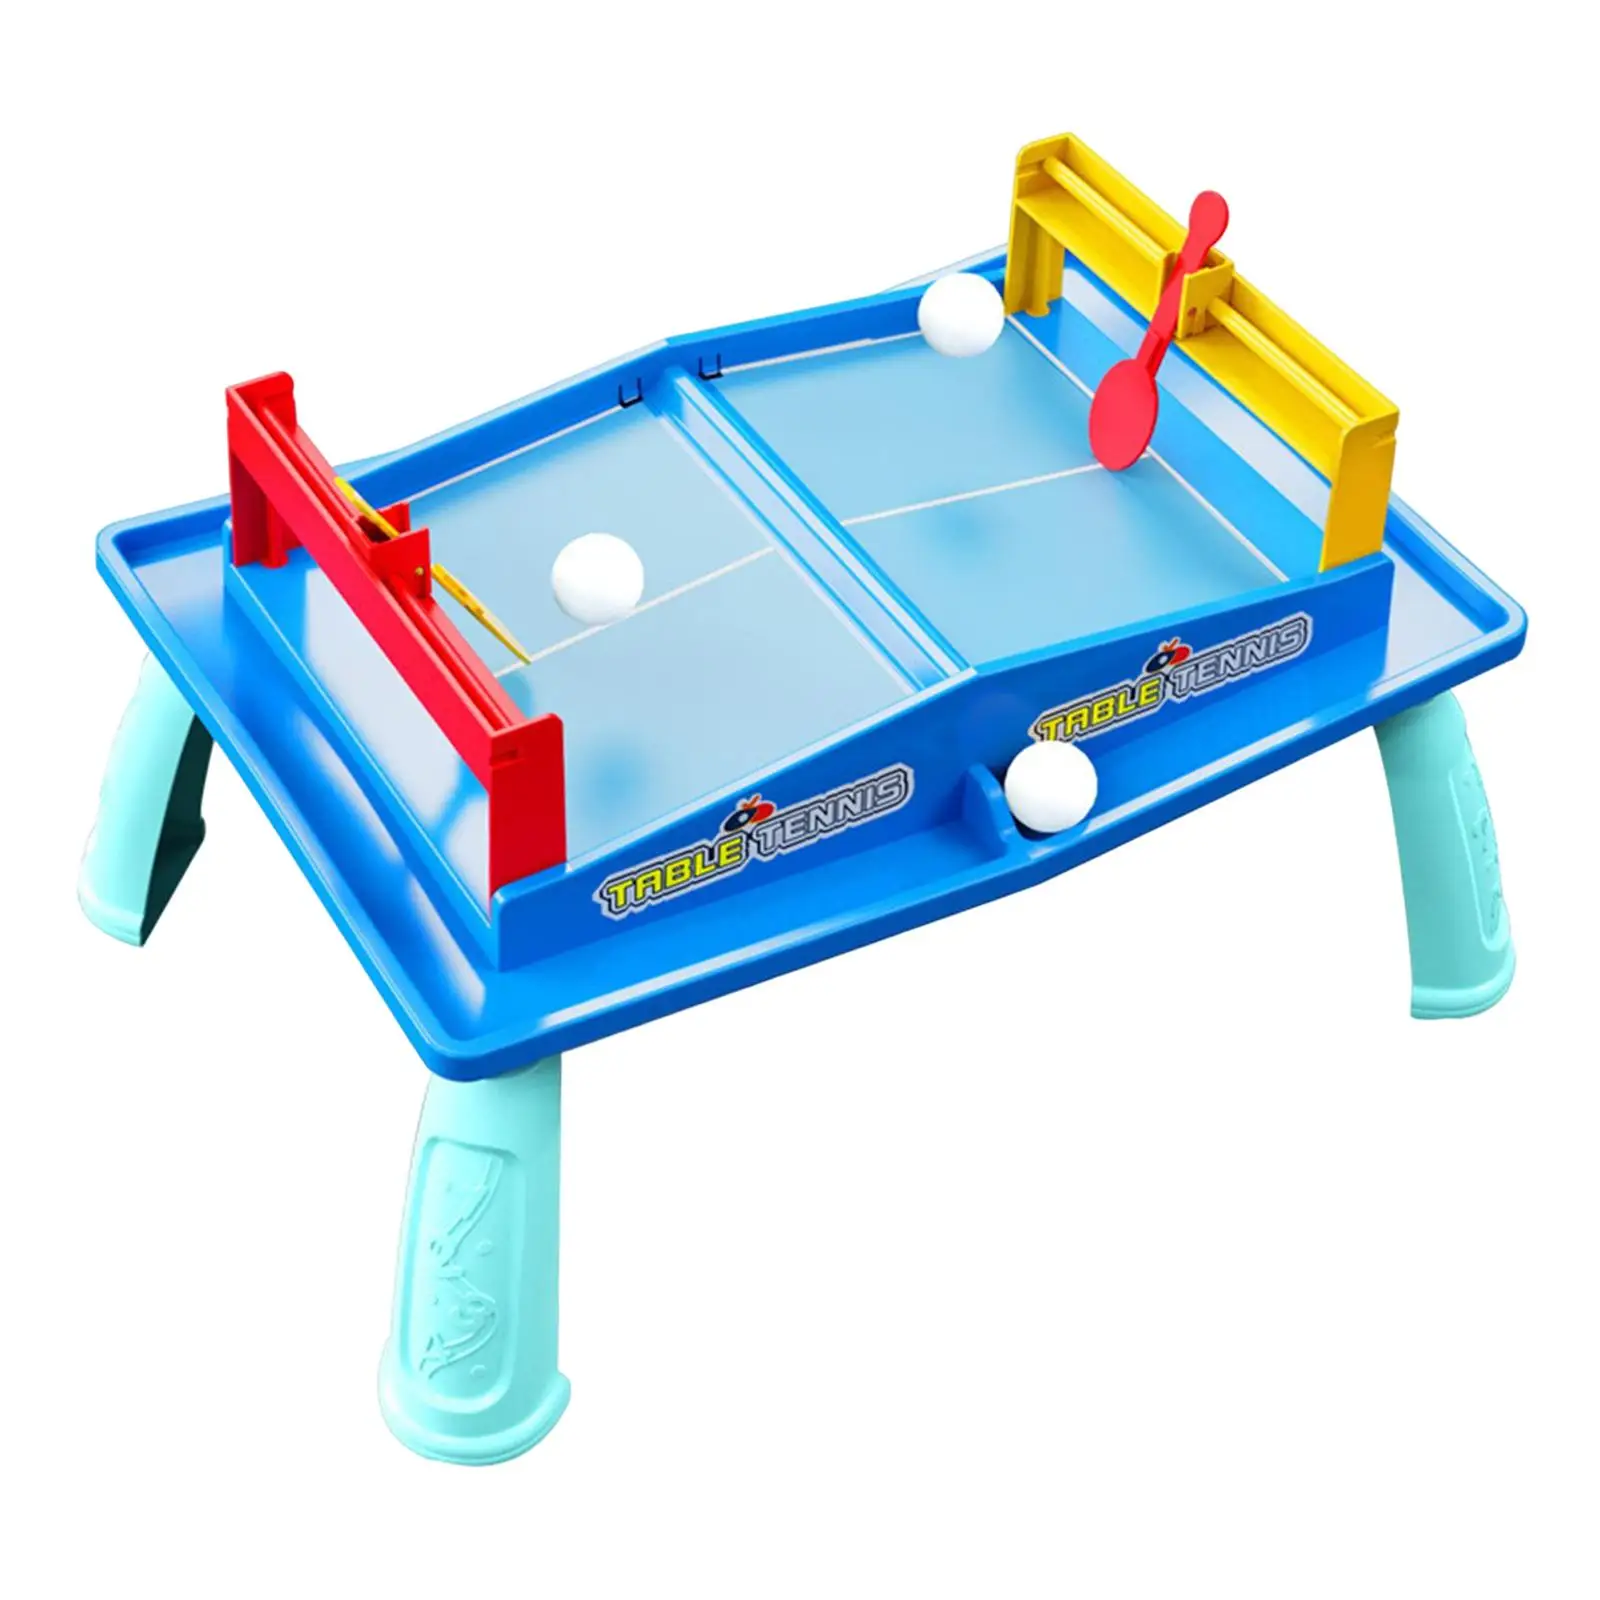 Kids Table Games Table Tennis Game Interaction Toy Removable Double Play Mini Table Tennis Toy for Gift Family Boys Girls Child